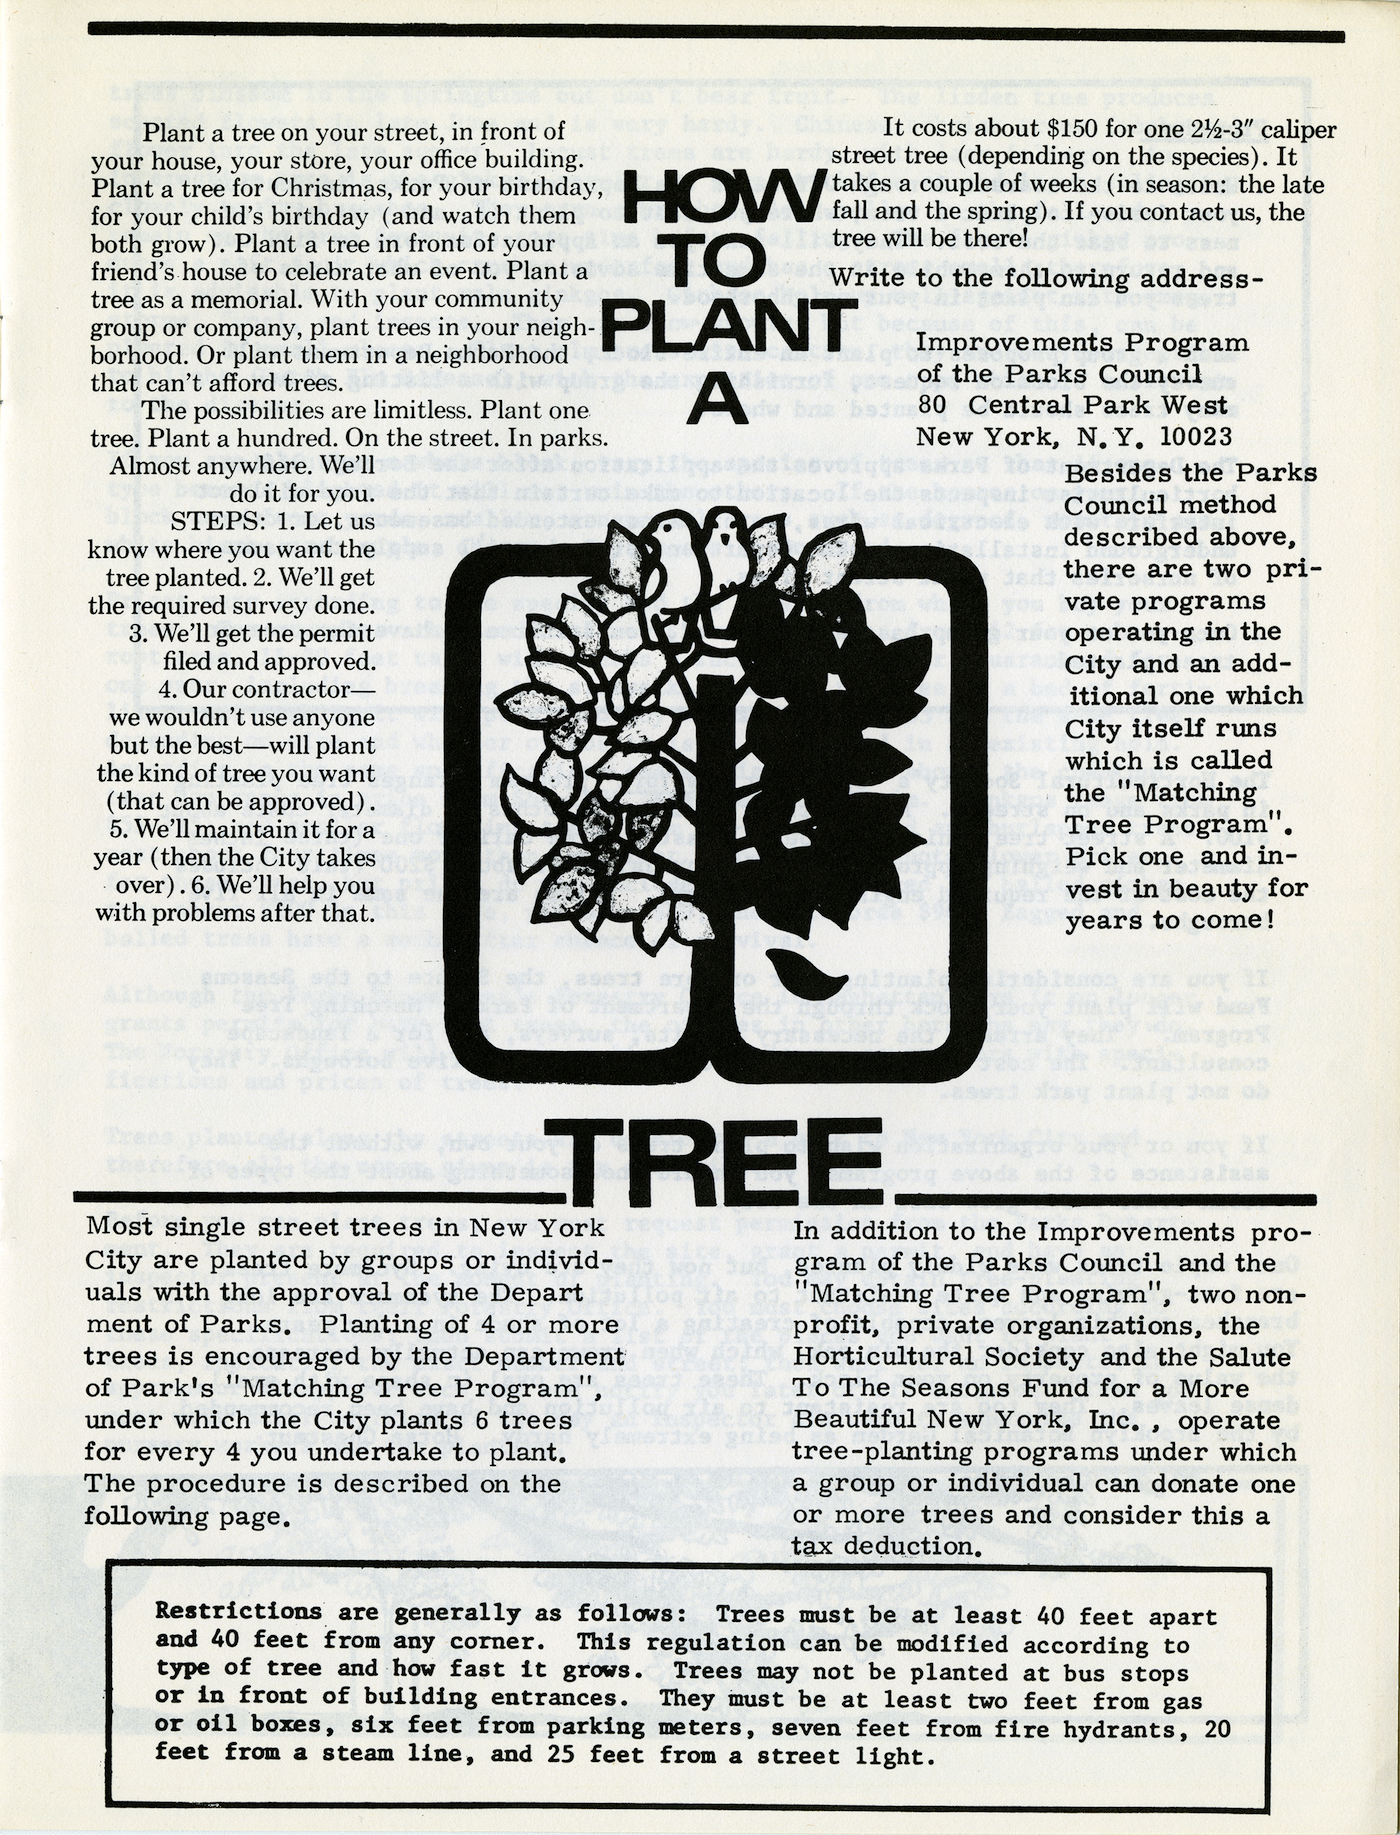 How to Plant A Tree (1970s) (Ronald Shiffman collection on the Pratt Center for Community Development, 2013.023, Box 70, Folder 23; Brooklyn Historical Society)